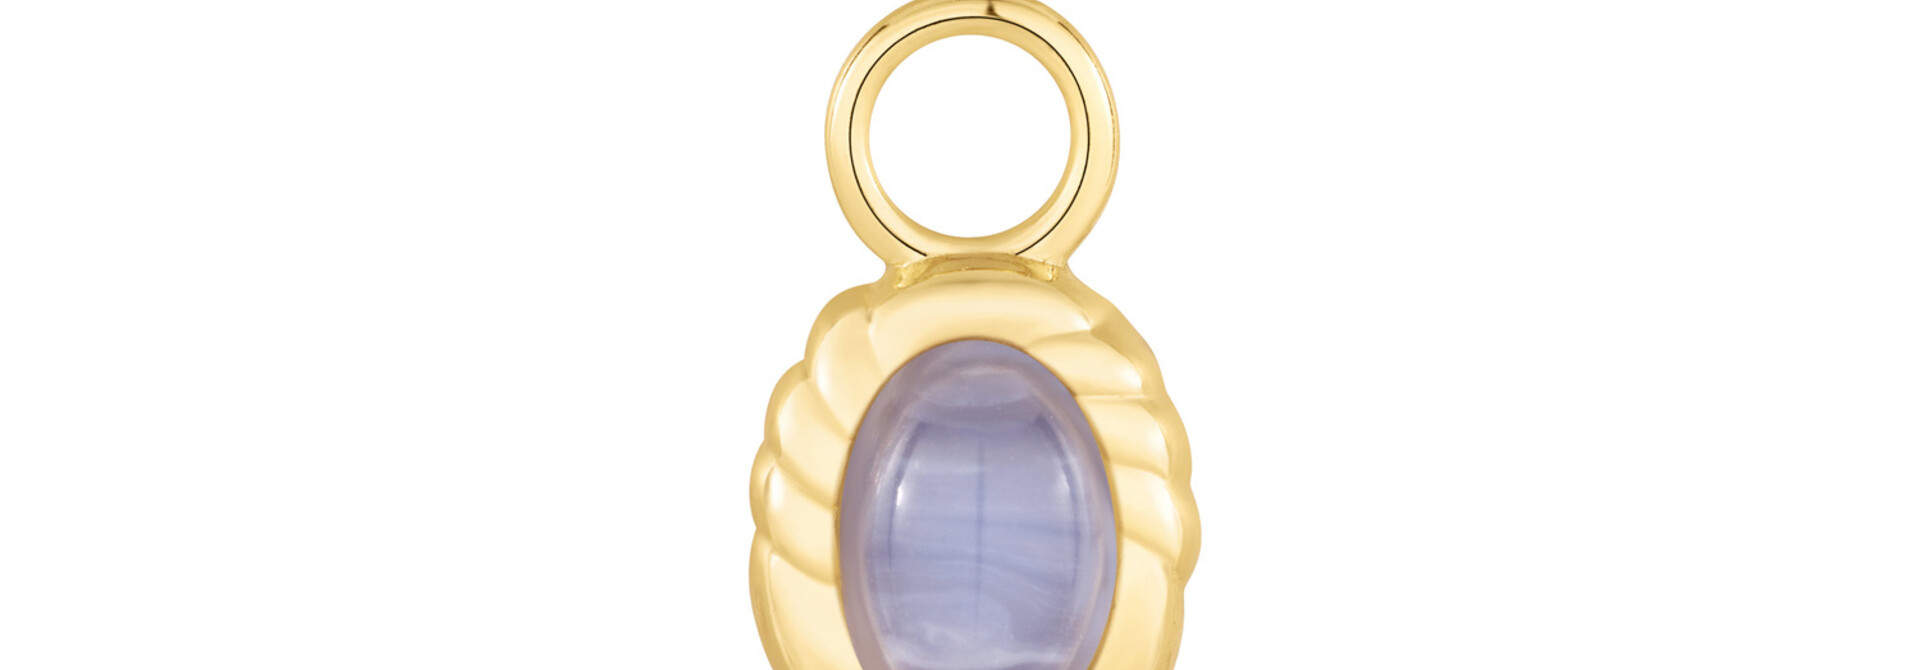 Oval Blue Agate Earring Charm - Gold Plated